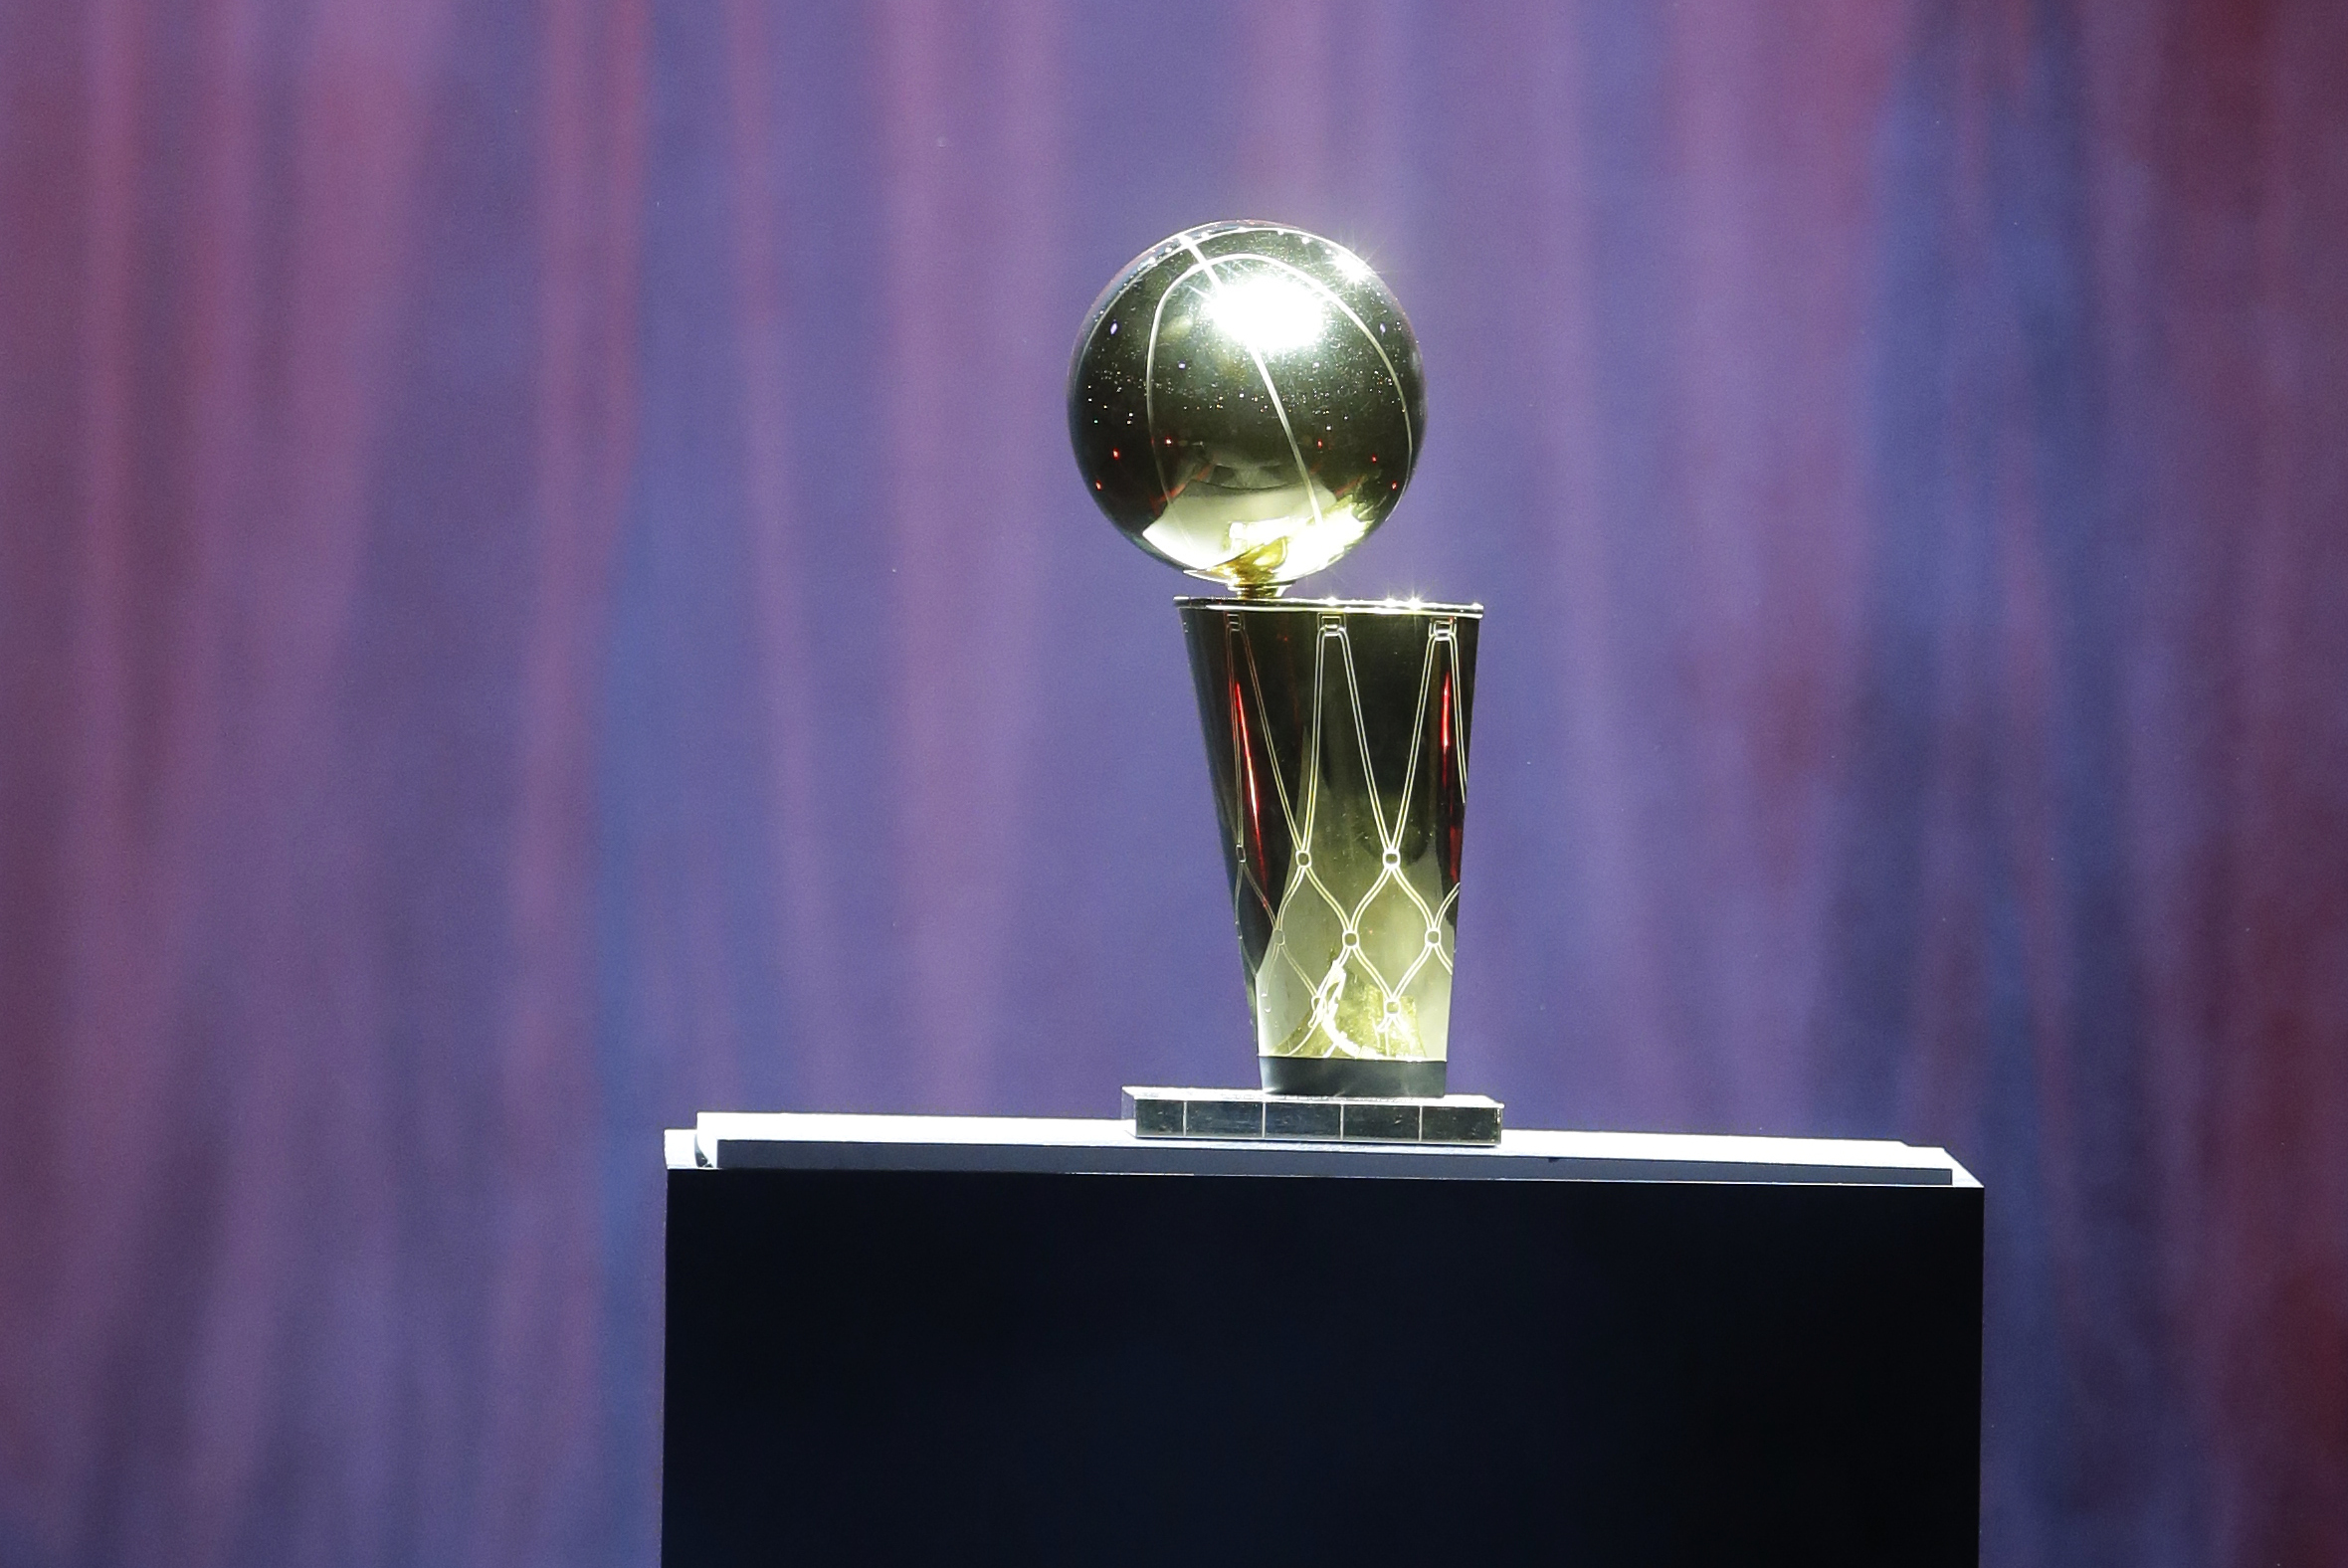 Louis Vuitton and NBA collaborate to announce global partnership and reveal  of exclusive travel trophy case - The Glass Magazine